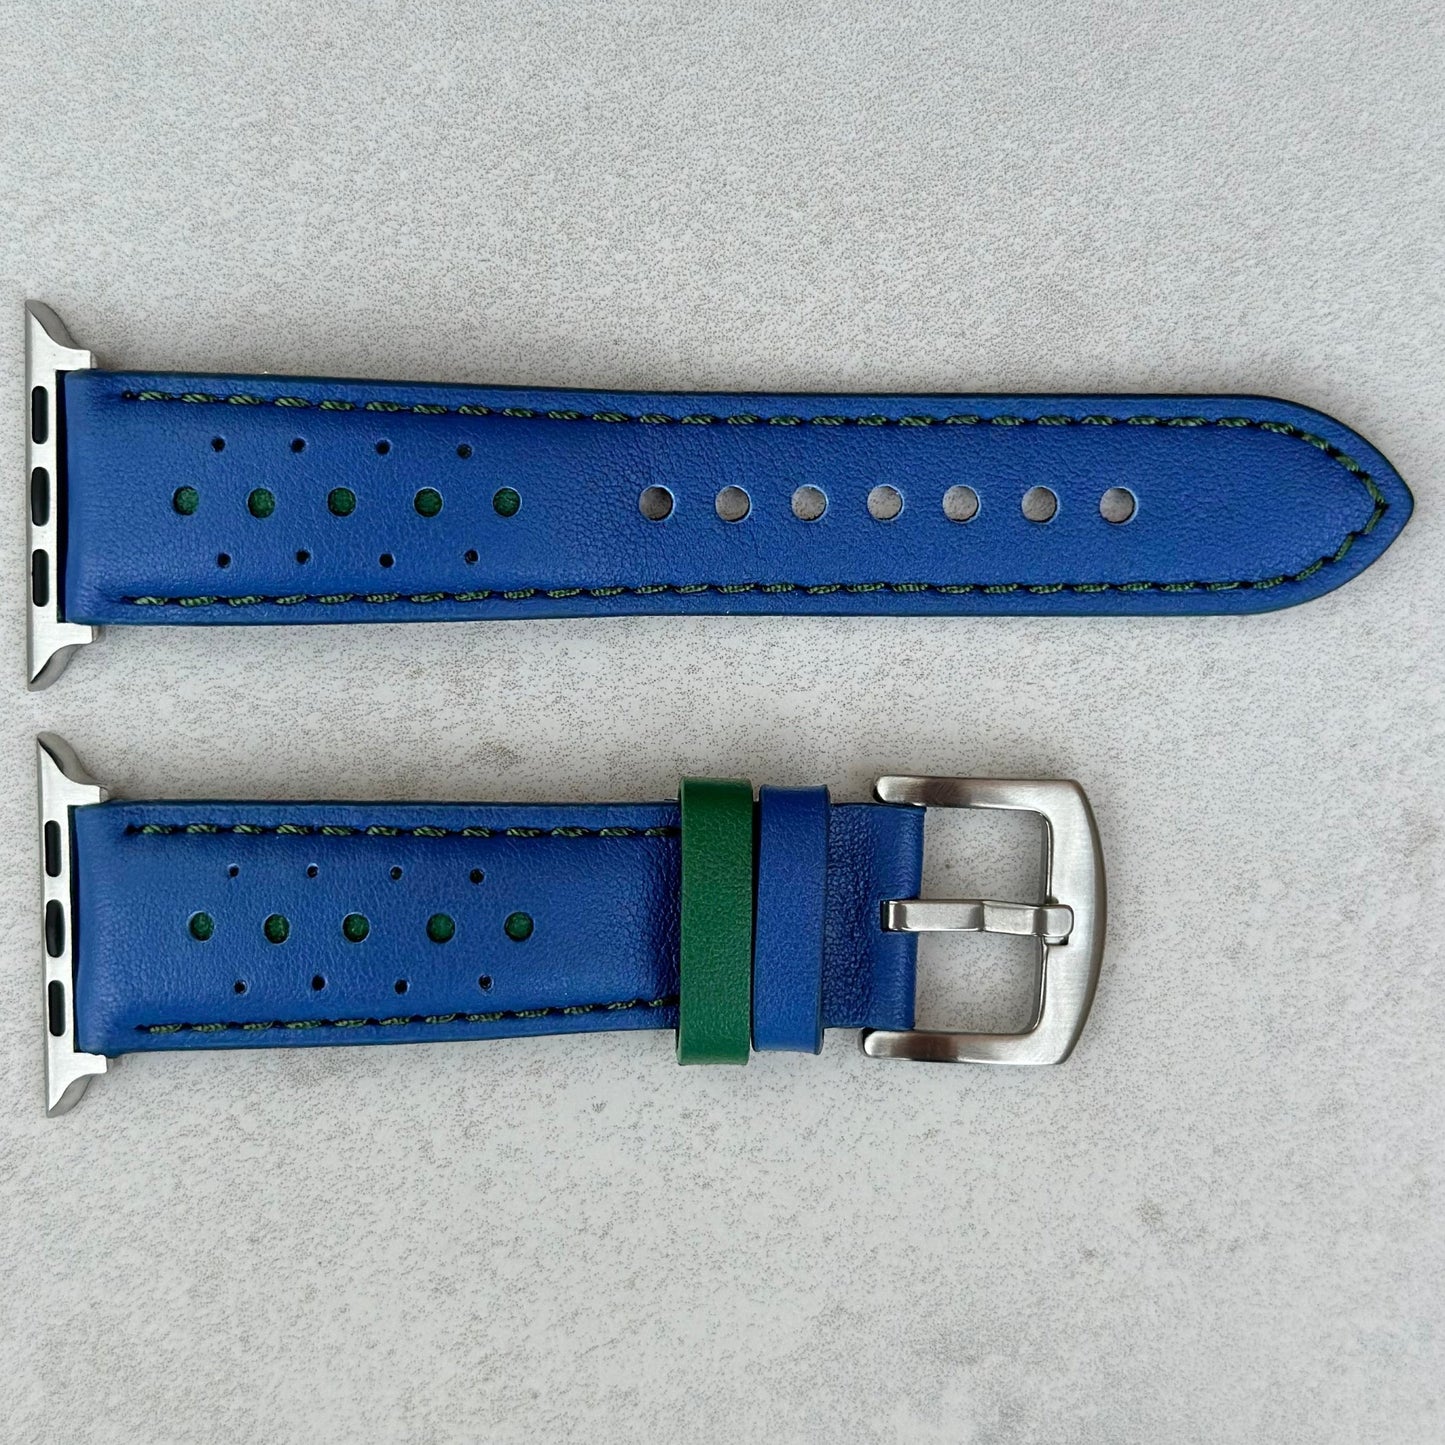 Birds eye view of the Le Mans Cobalt Blue and Green full grain leather apple watch strap.